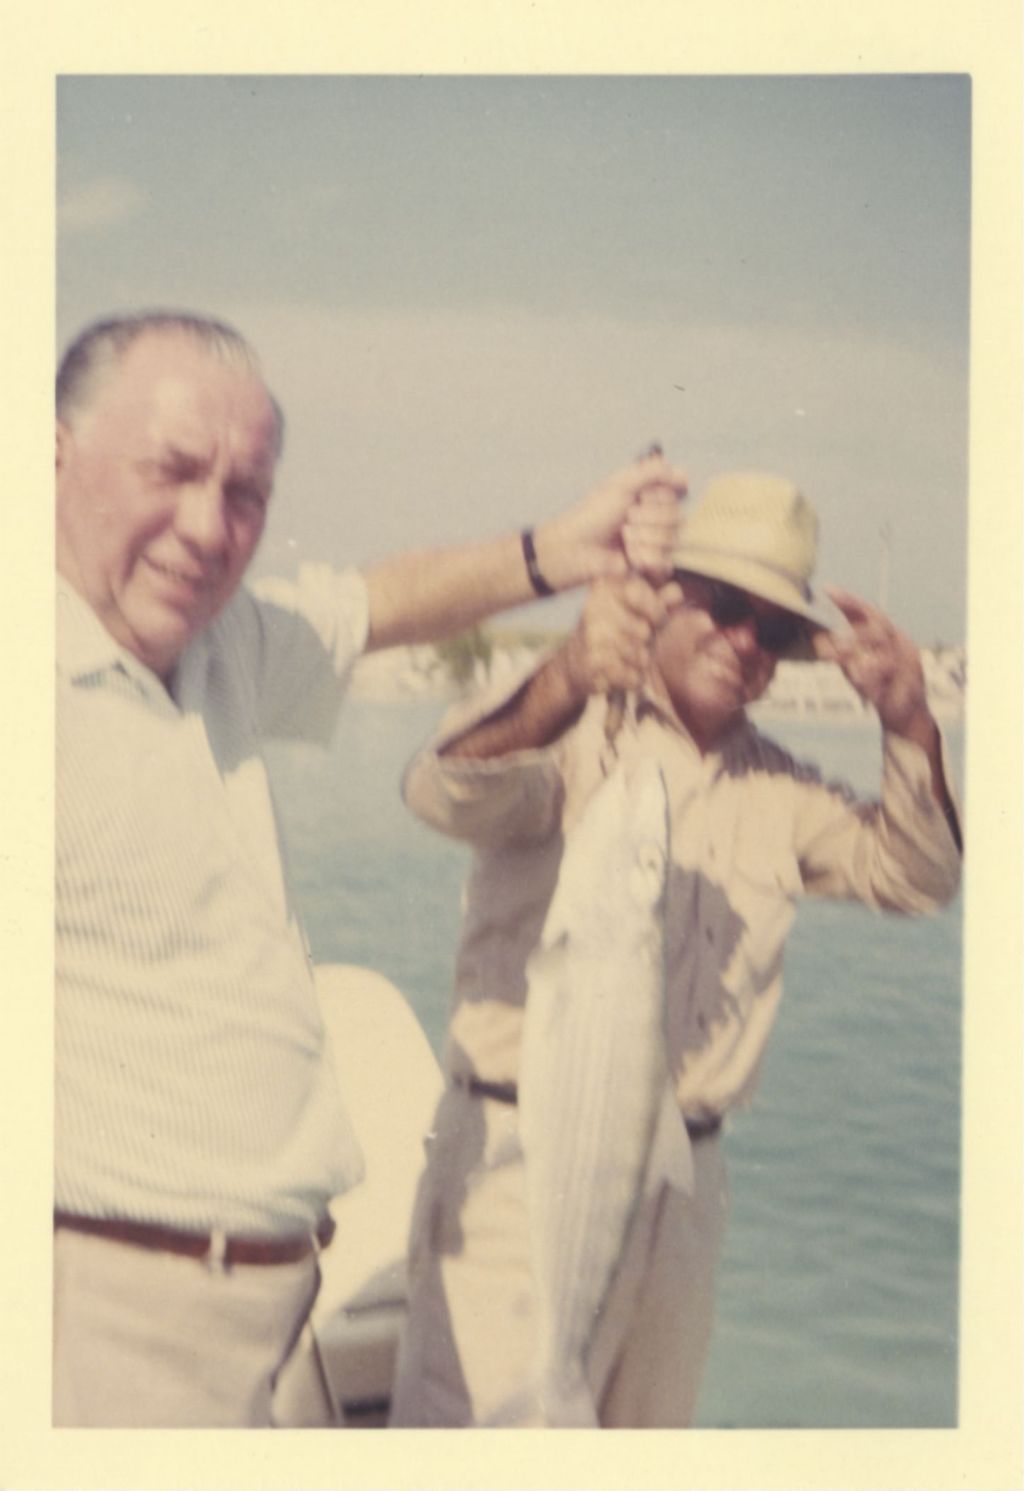 Miniature of Richard J. Daley and a man displaying their catch